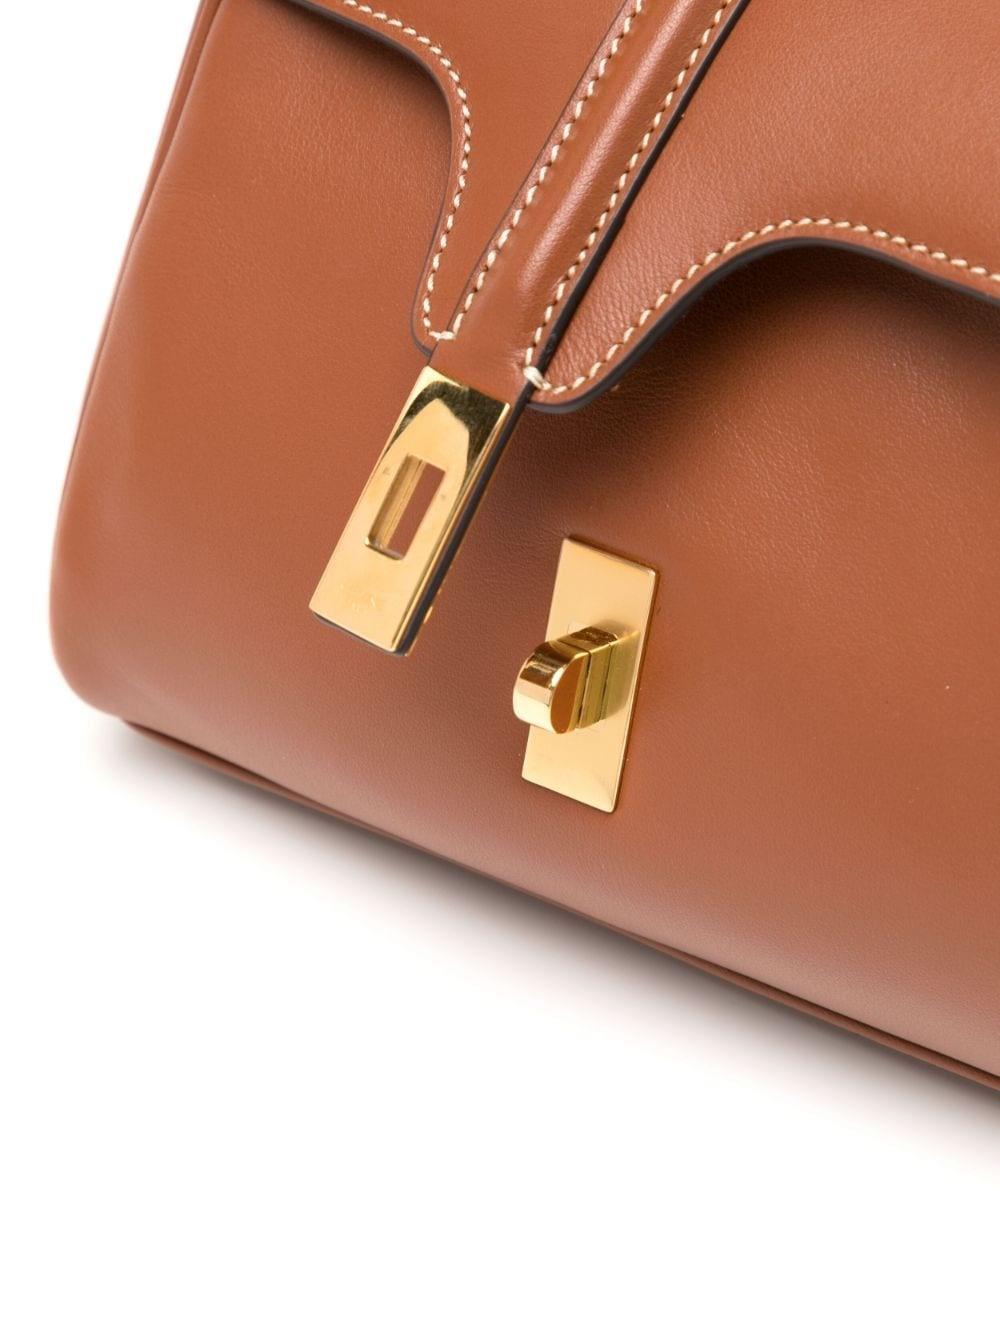 This Mini 16 bag from Celine is the epitome of quiet luxury. Crafted from CALFSKIN leather with lambskin lining and gold finishing, it is designed with versatility in mind. Features include a turn-lock closure, two main compartments, one inner flat